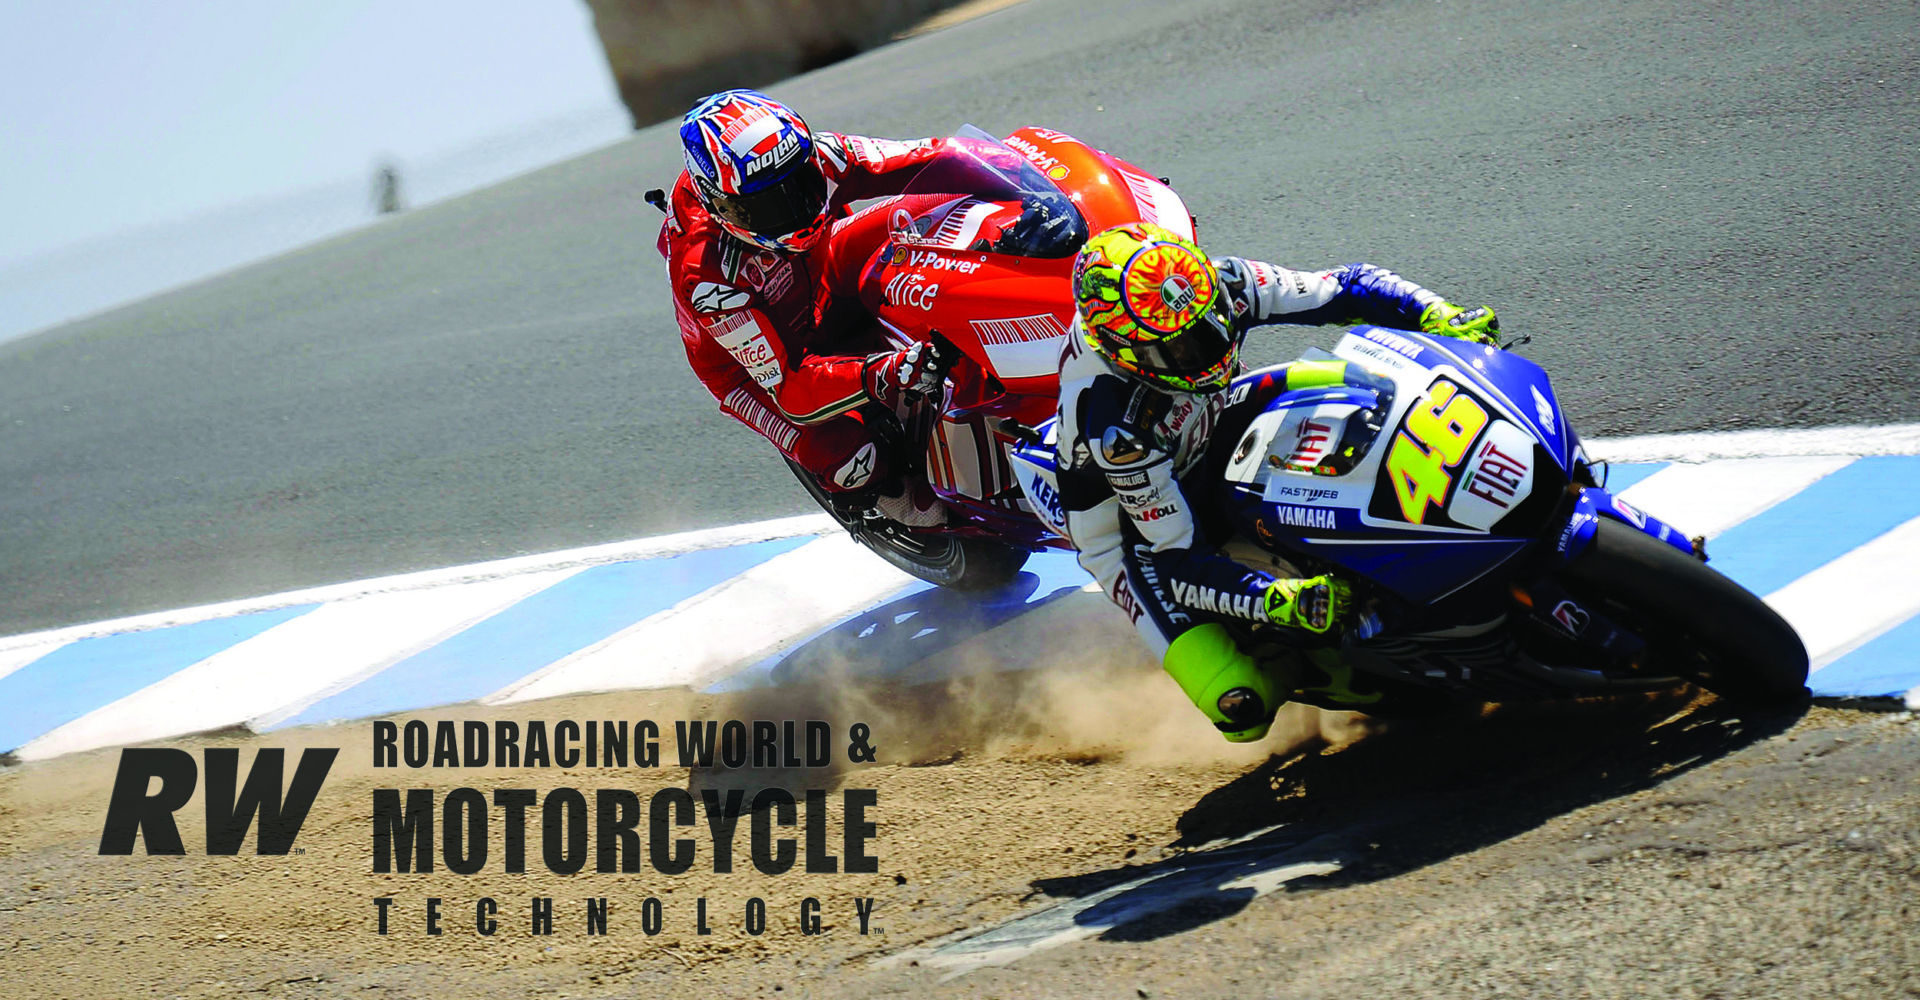 Valentino Rossi (46) making the winning move, passing Casey Stoner on the dirt heading down the Corkscrew at Laguna Seca in 2008. Photo by DPPI.